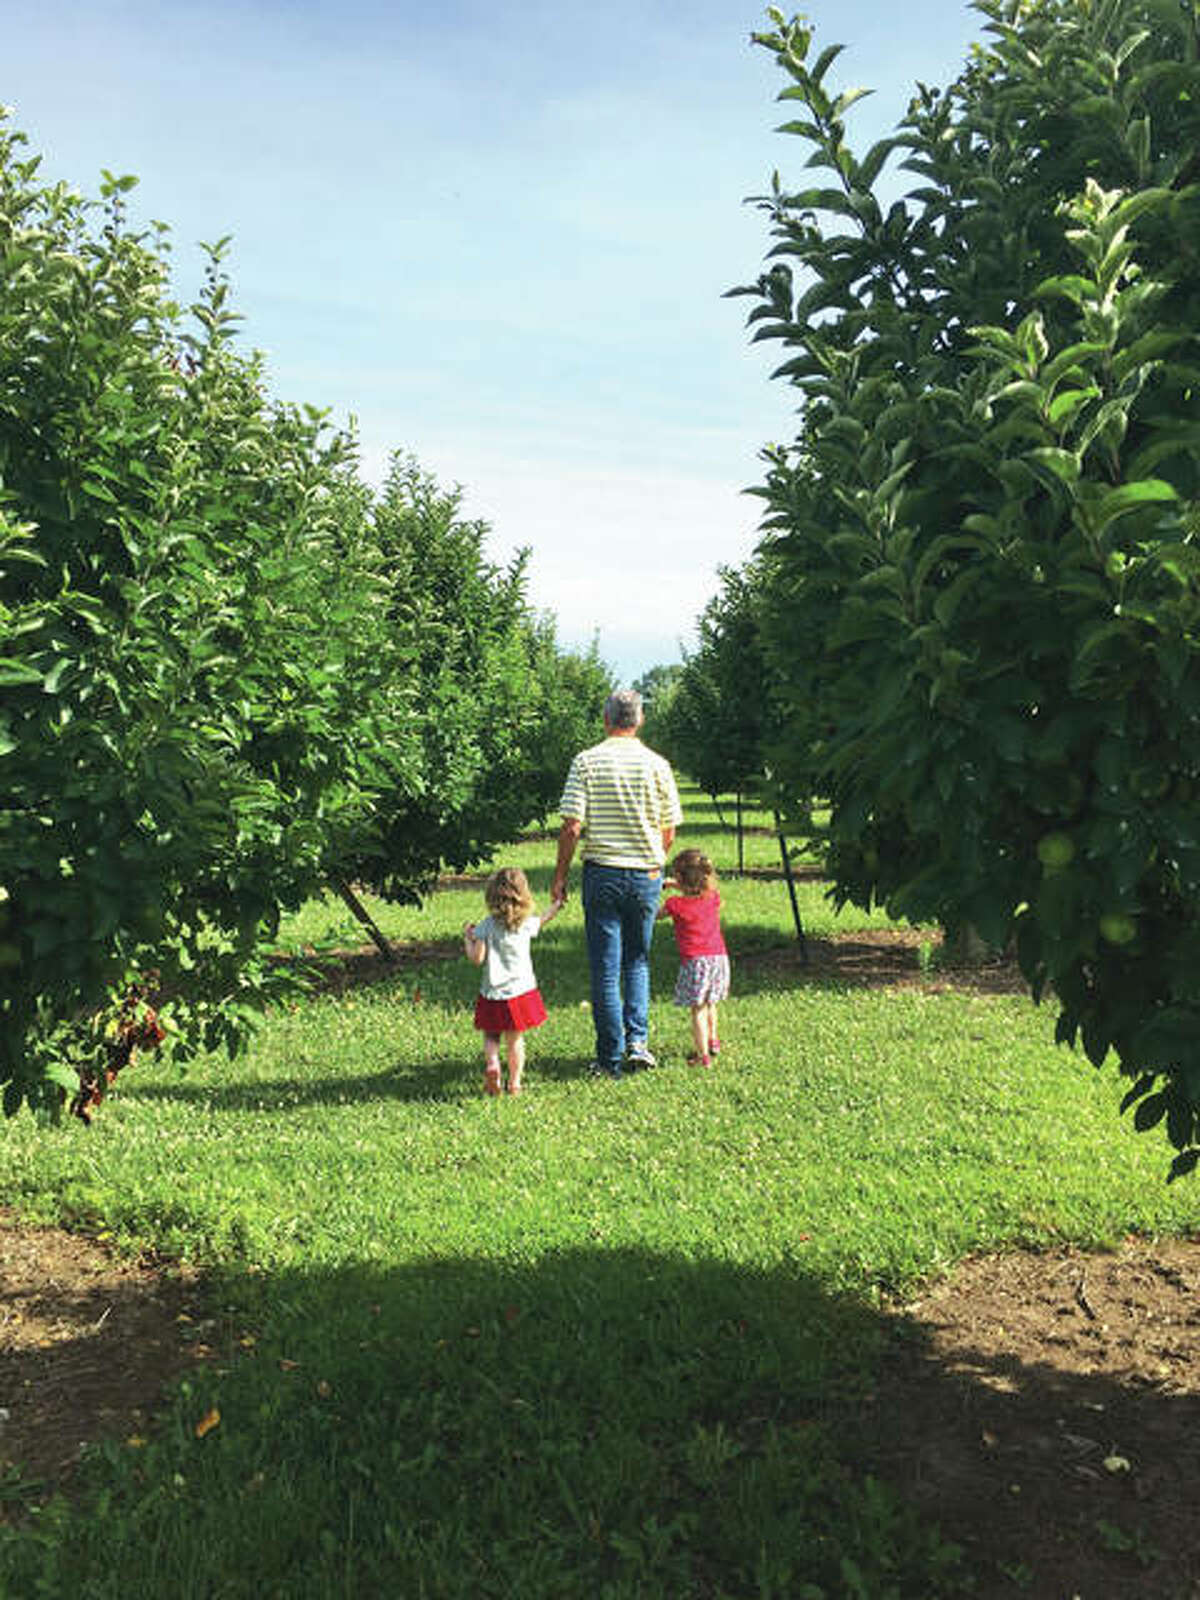 A look inside Liberty Apple Orchard.